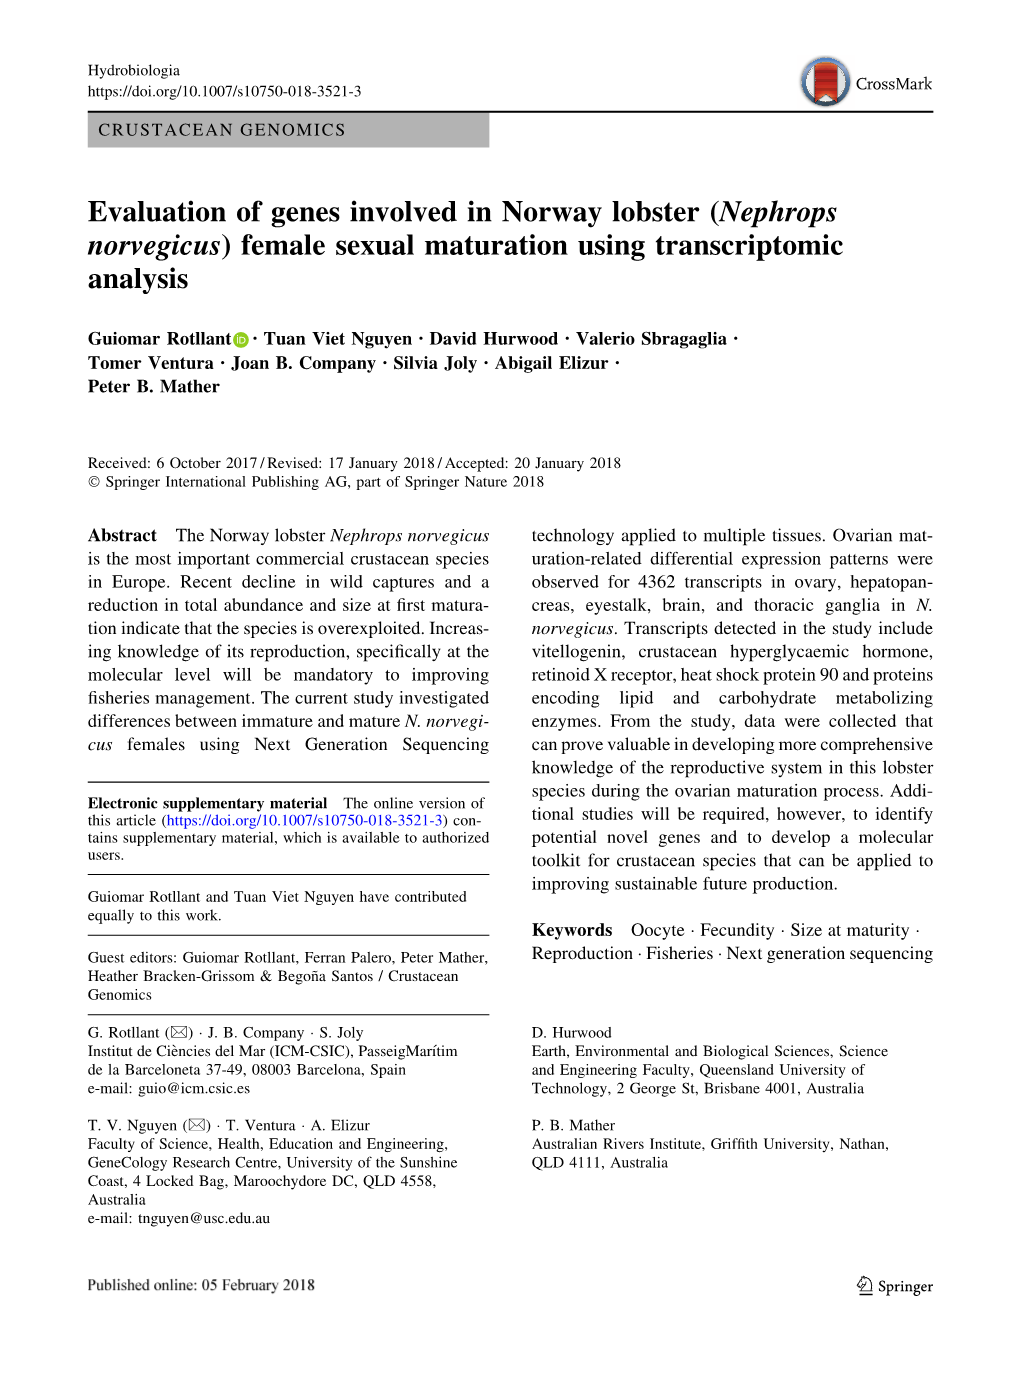 Evaluation of Genes Involved in Norway Lobster (Nephrops Norvegicus) Female Sexual Maturation Using Transcriptomic Analysis